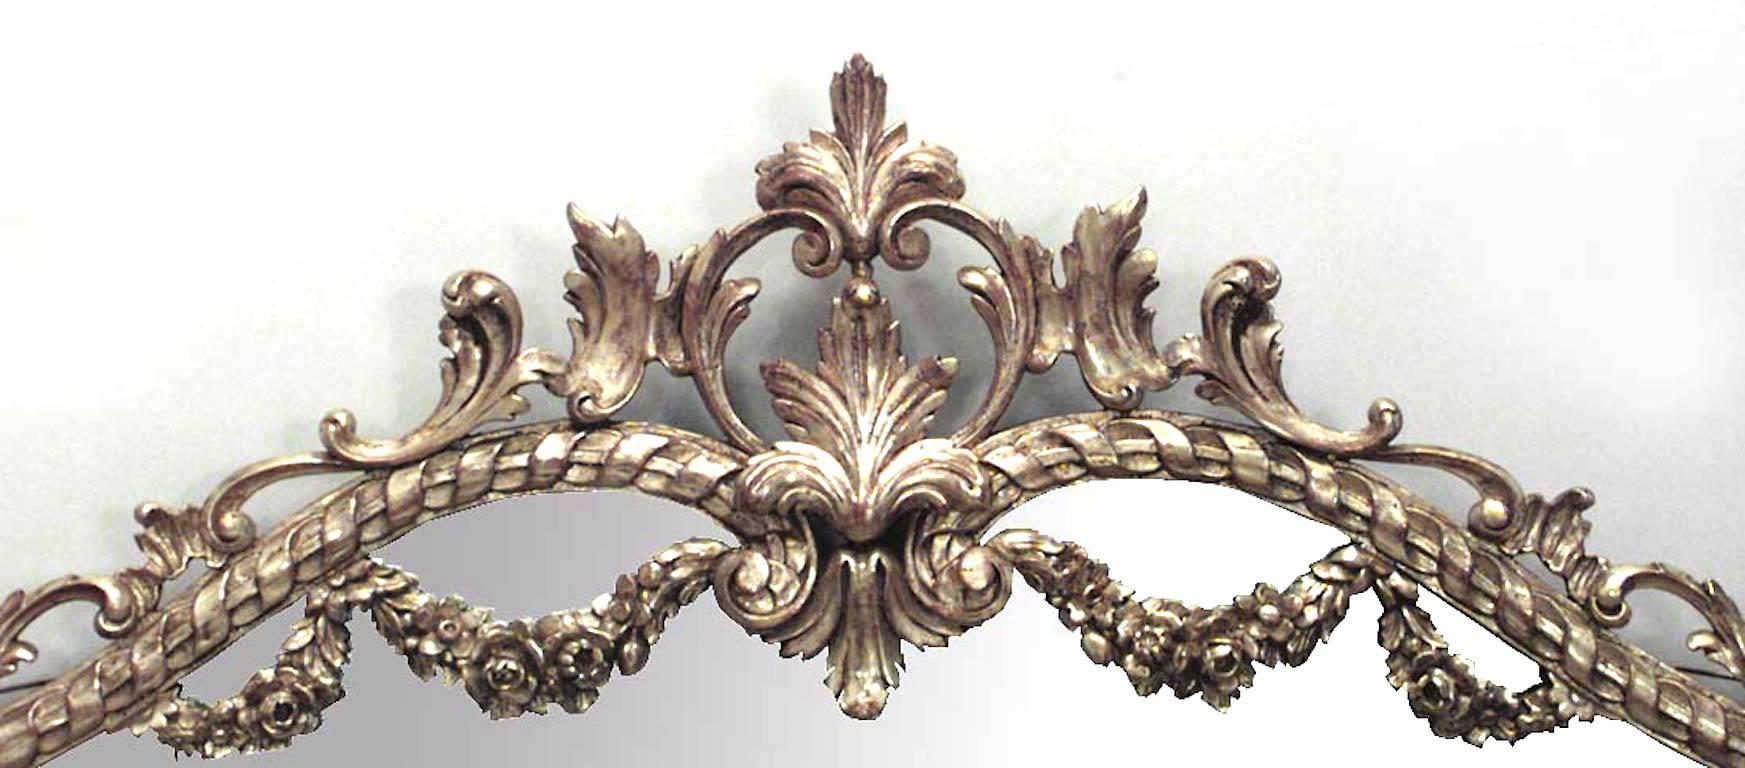 French Louis XVI-style (19/20th Century) horizontal carved giltwood wall mirror with four festoons and cornucopia floral sides (Related item: 032632A)
